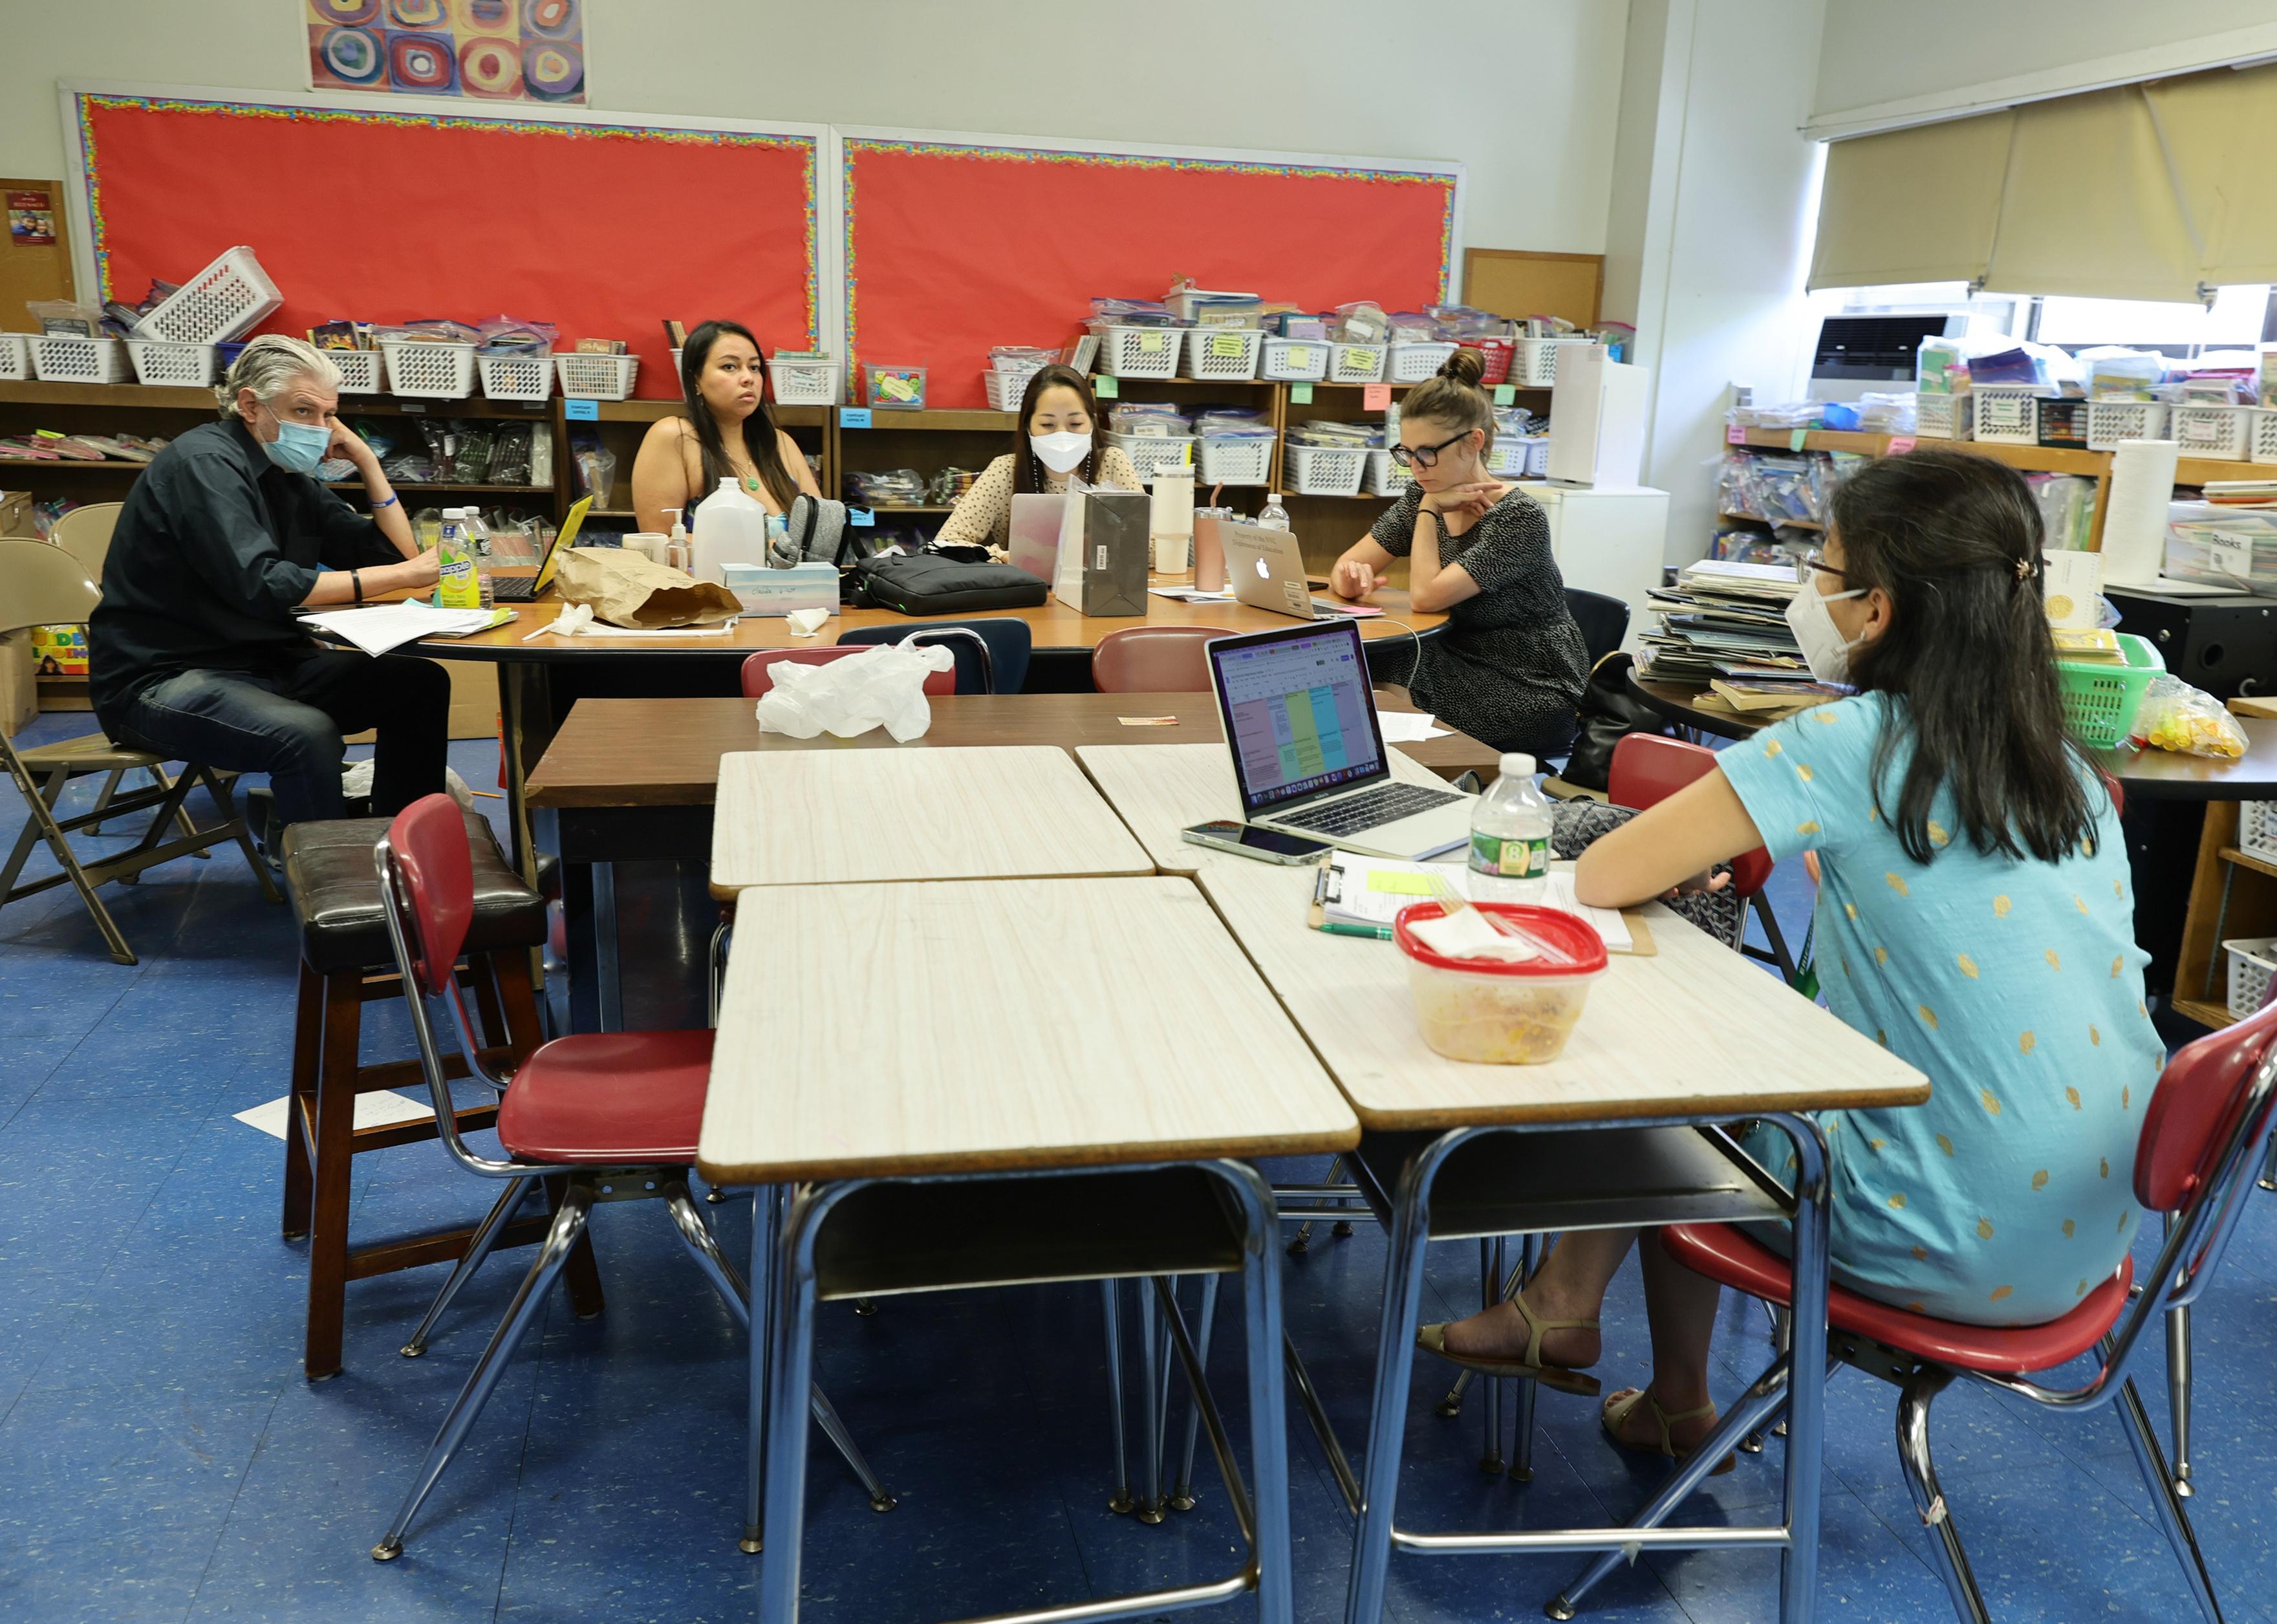 Students at tables with computers in a classroom.